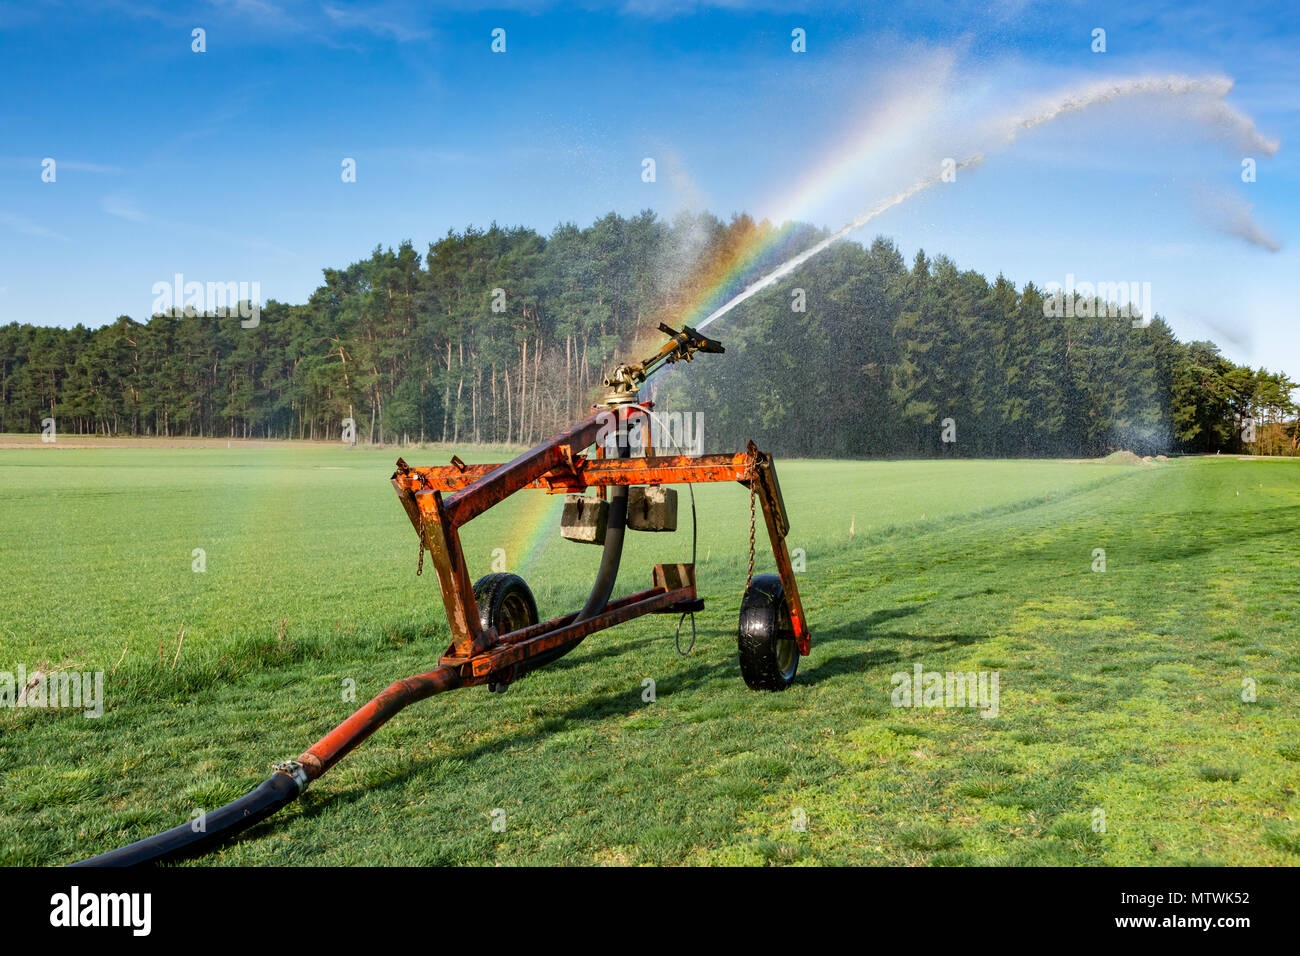 Watering a field with a sprinkler system Stock Photo